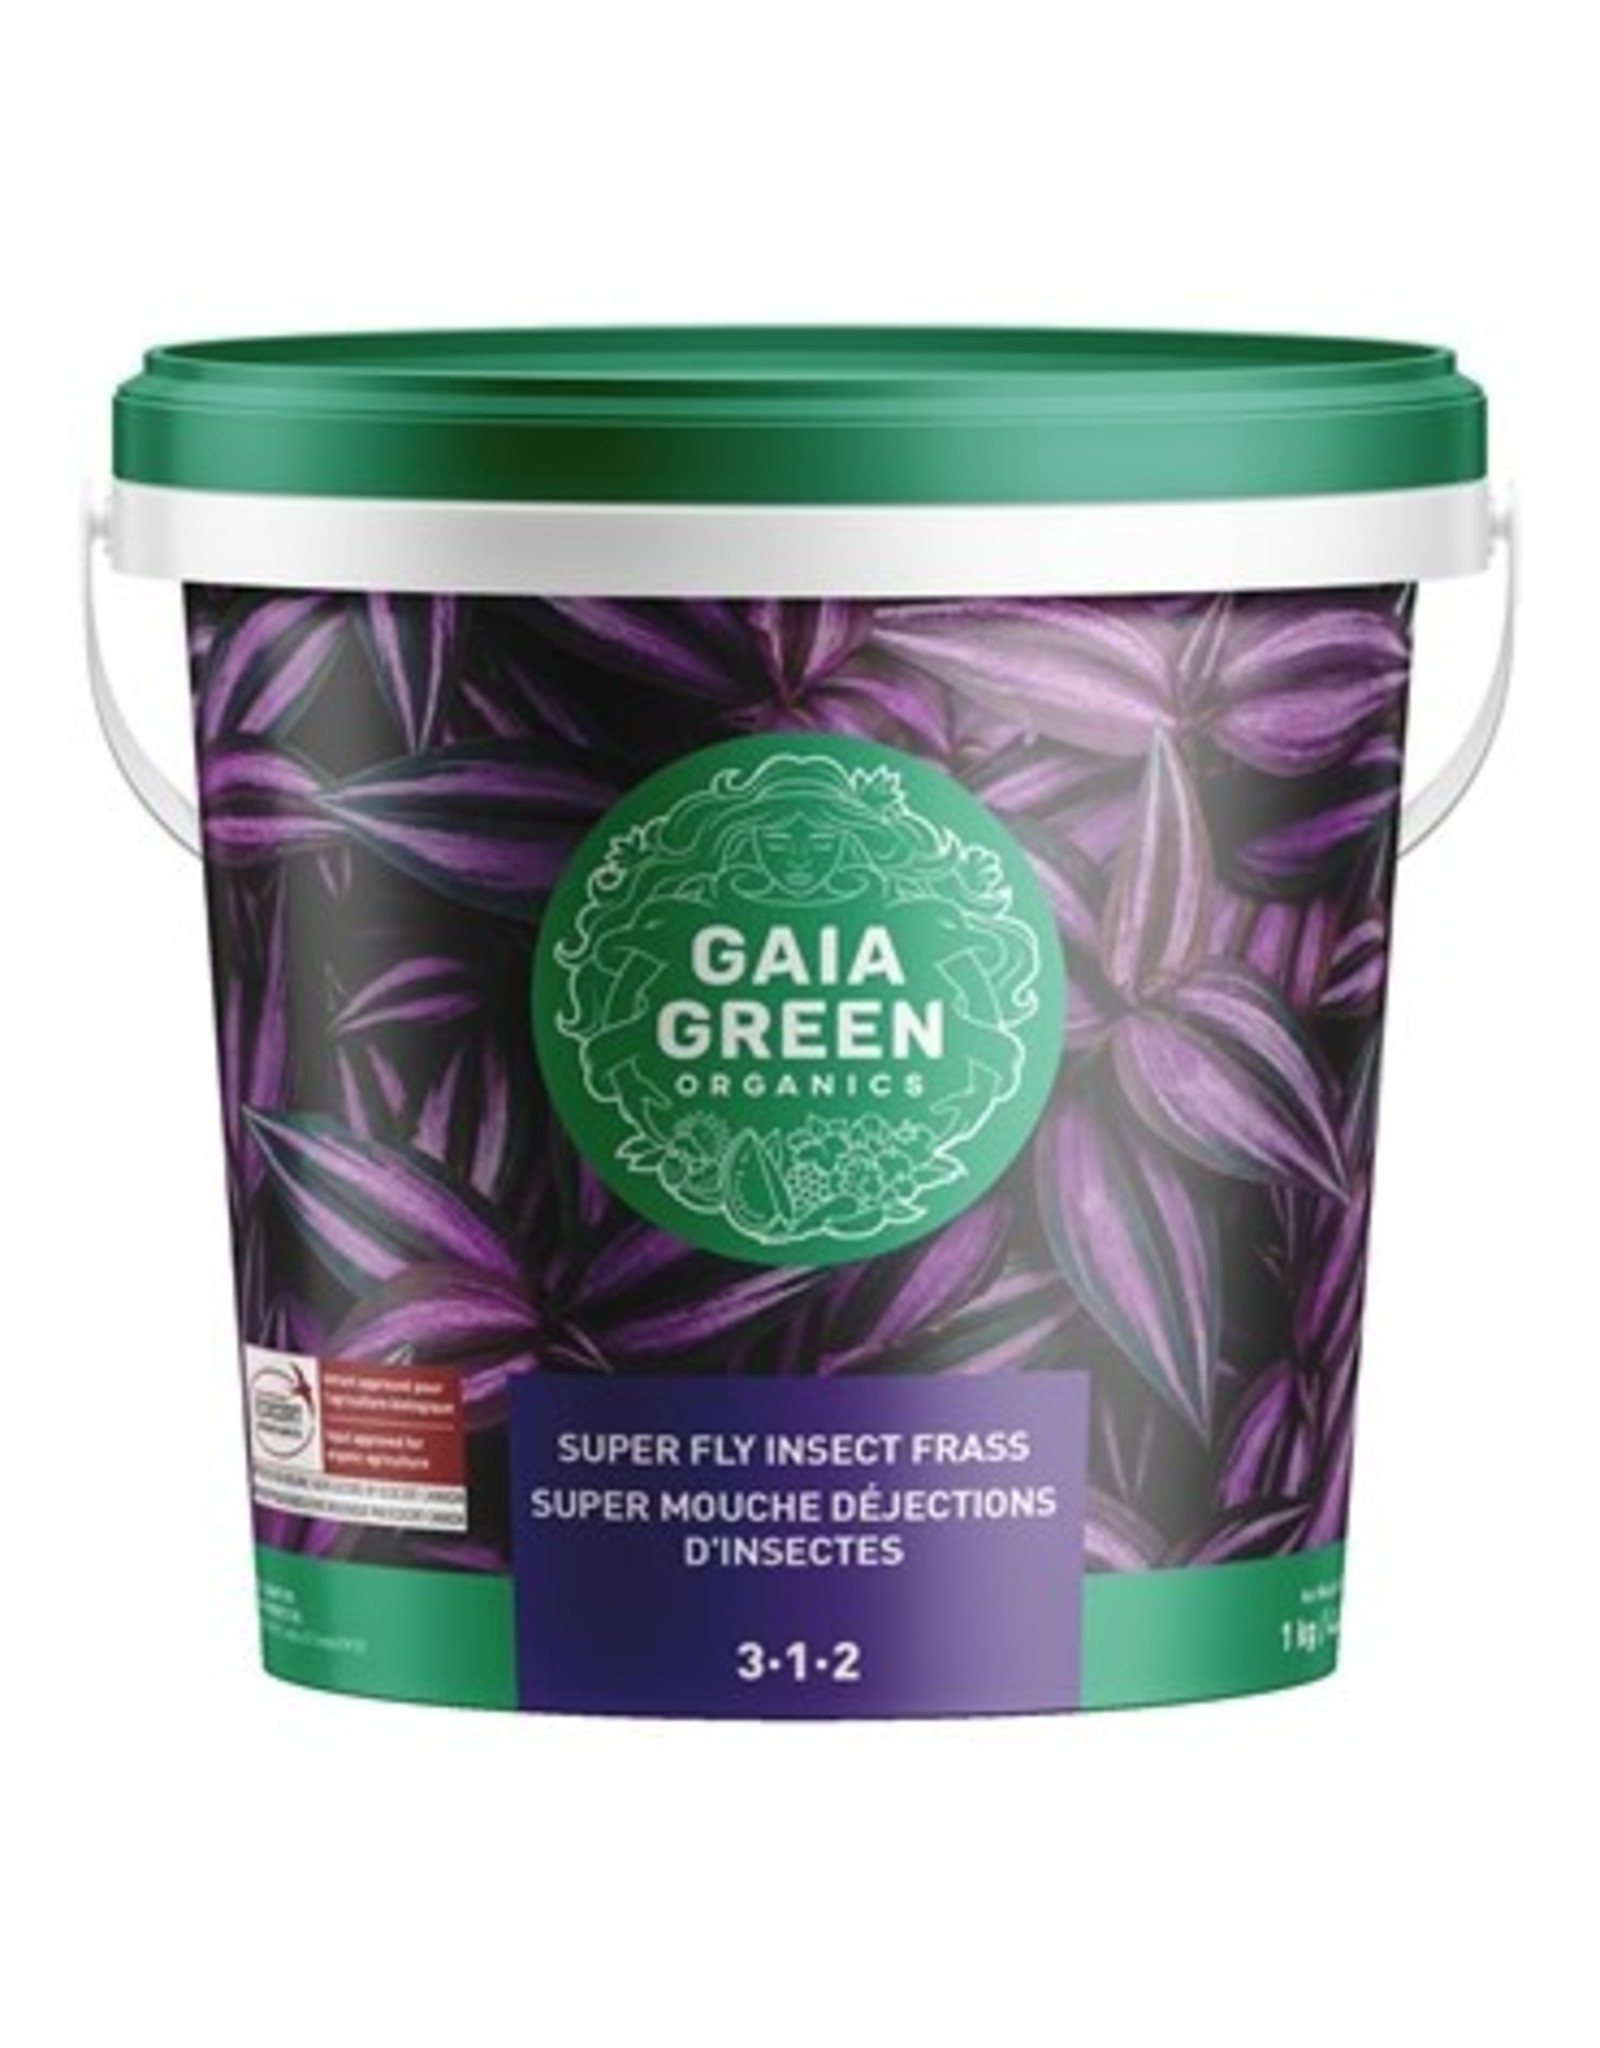 Gaia Green Gaia Green Super Fly Insect Frass 3-1-2 - 750g